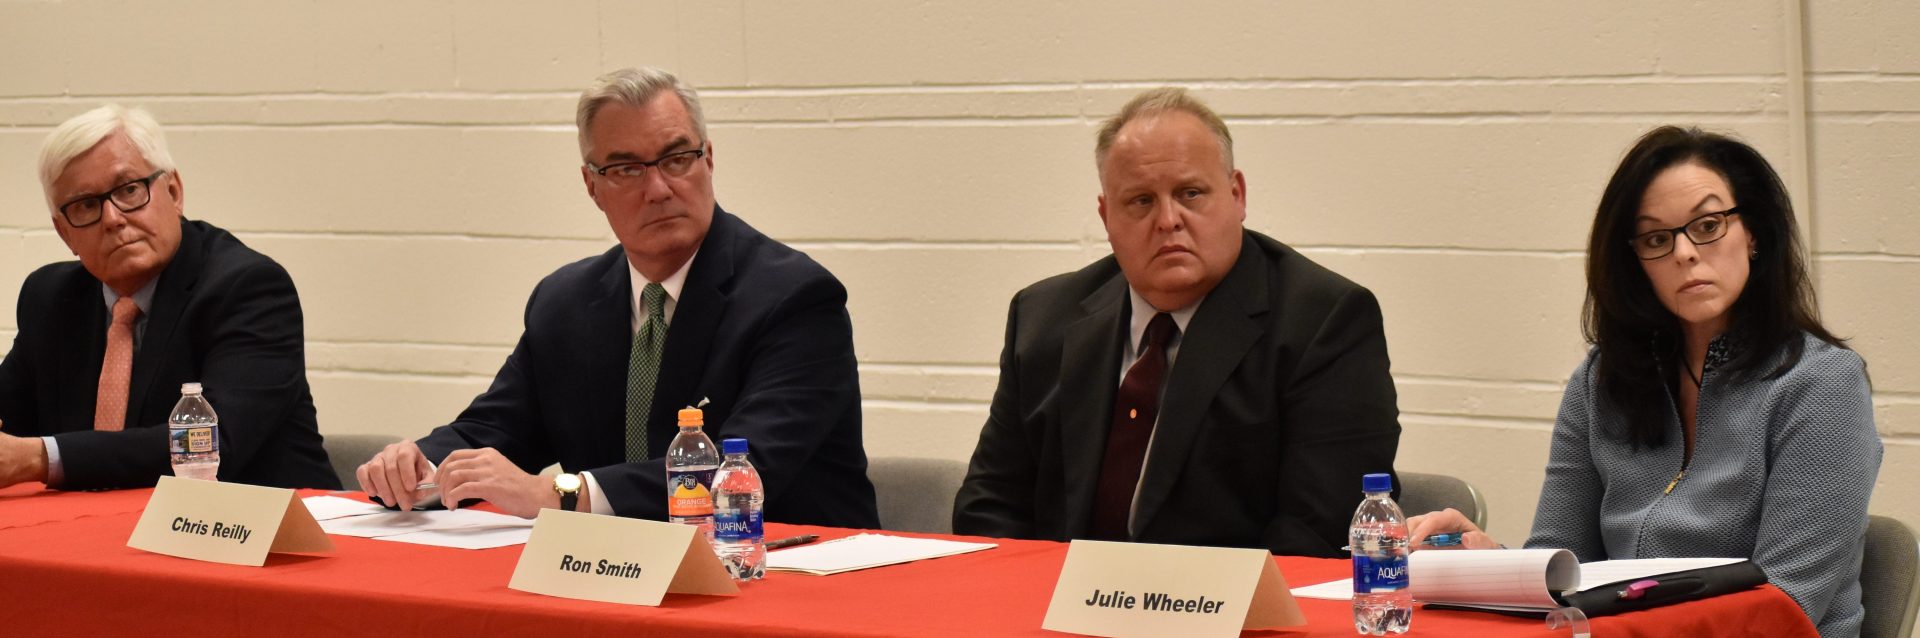 Four Republican candidates for York County commissioner participated in a debate on April, 29, 2019. They are, from left to right, Steve Chronister, Chris Reilly, Ron Smith and Julie Wheeler.